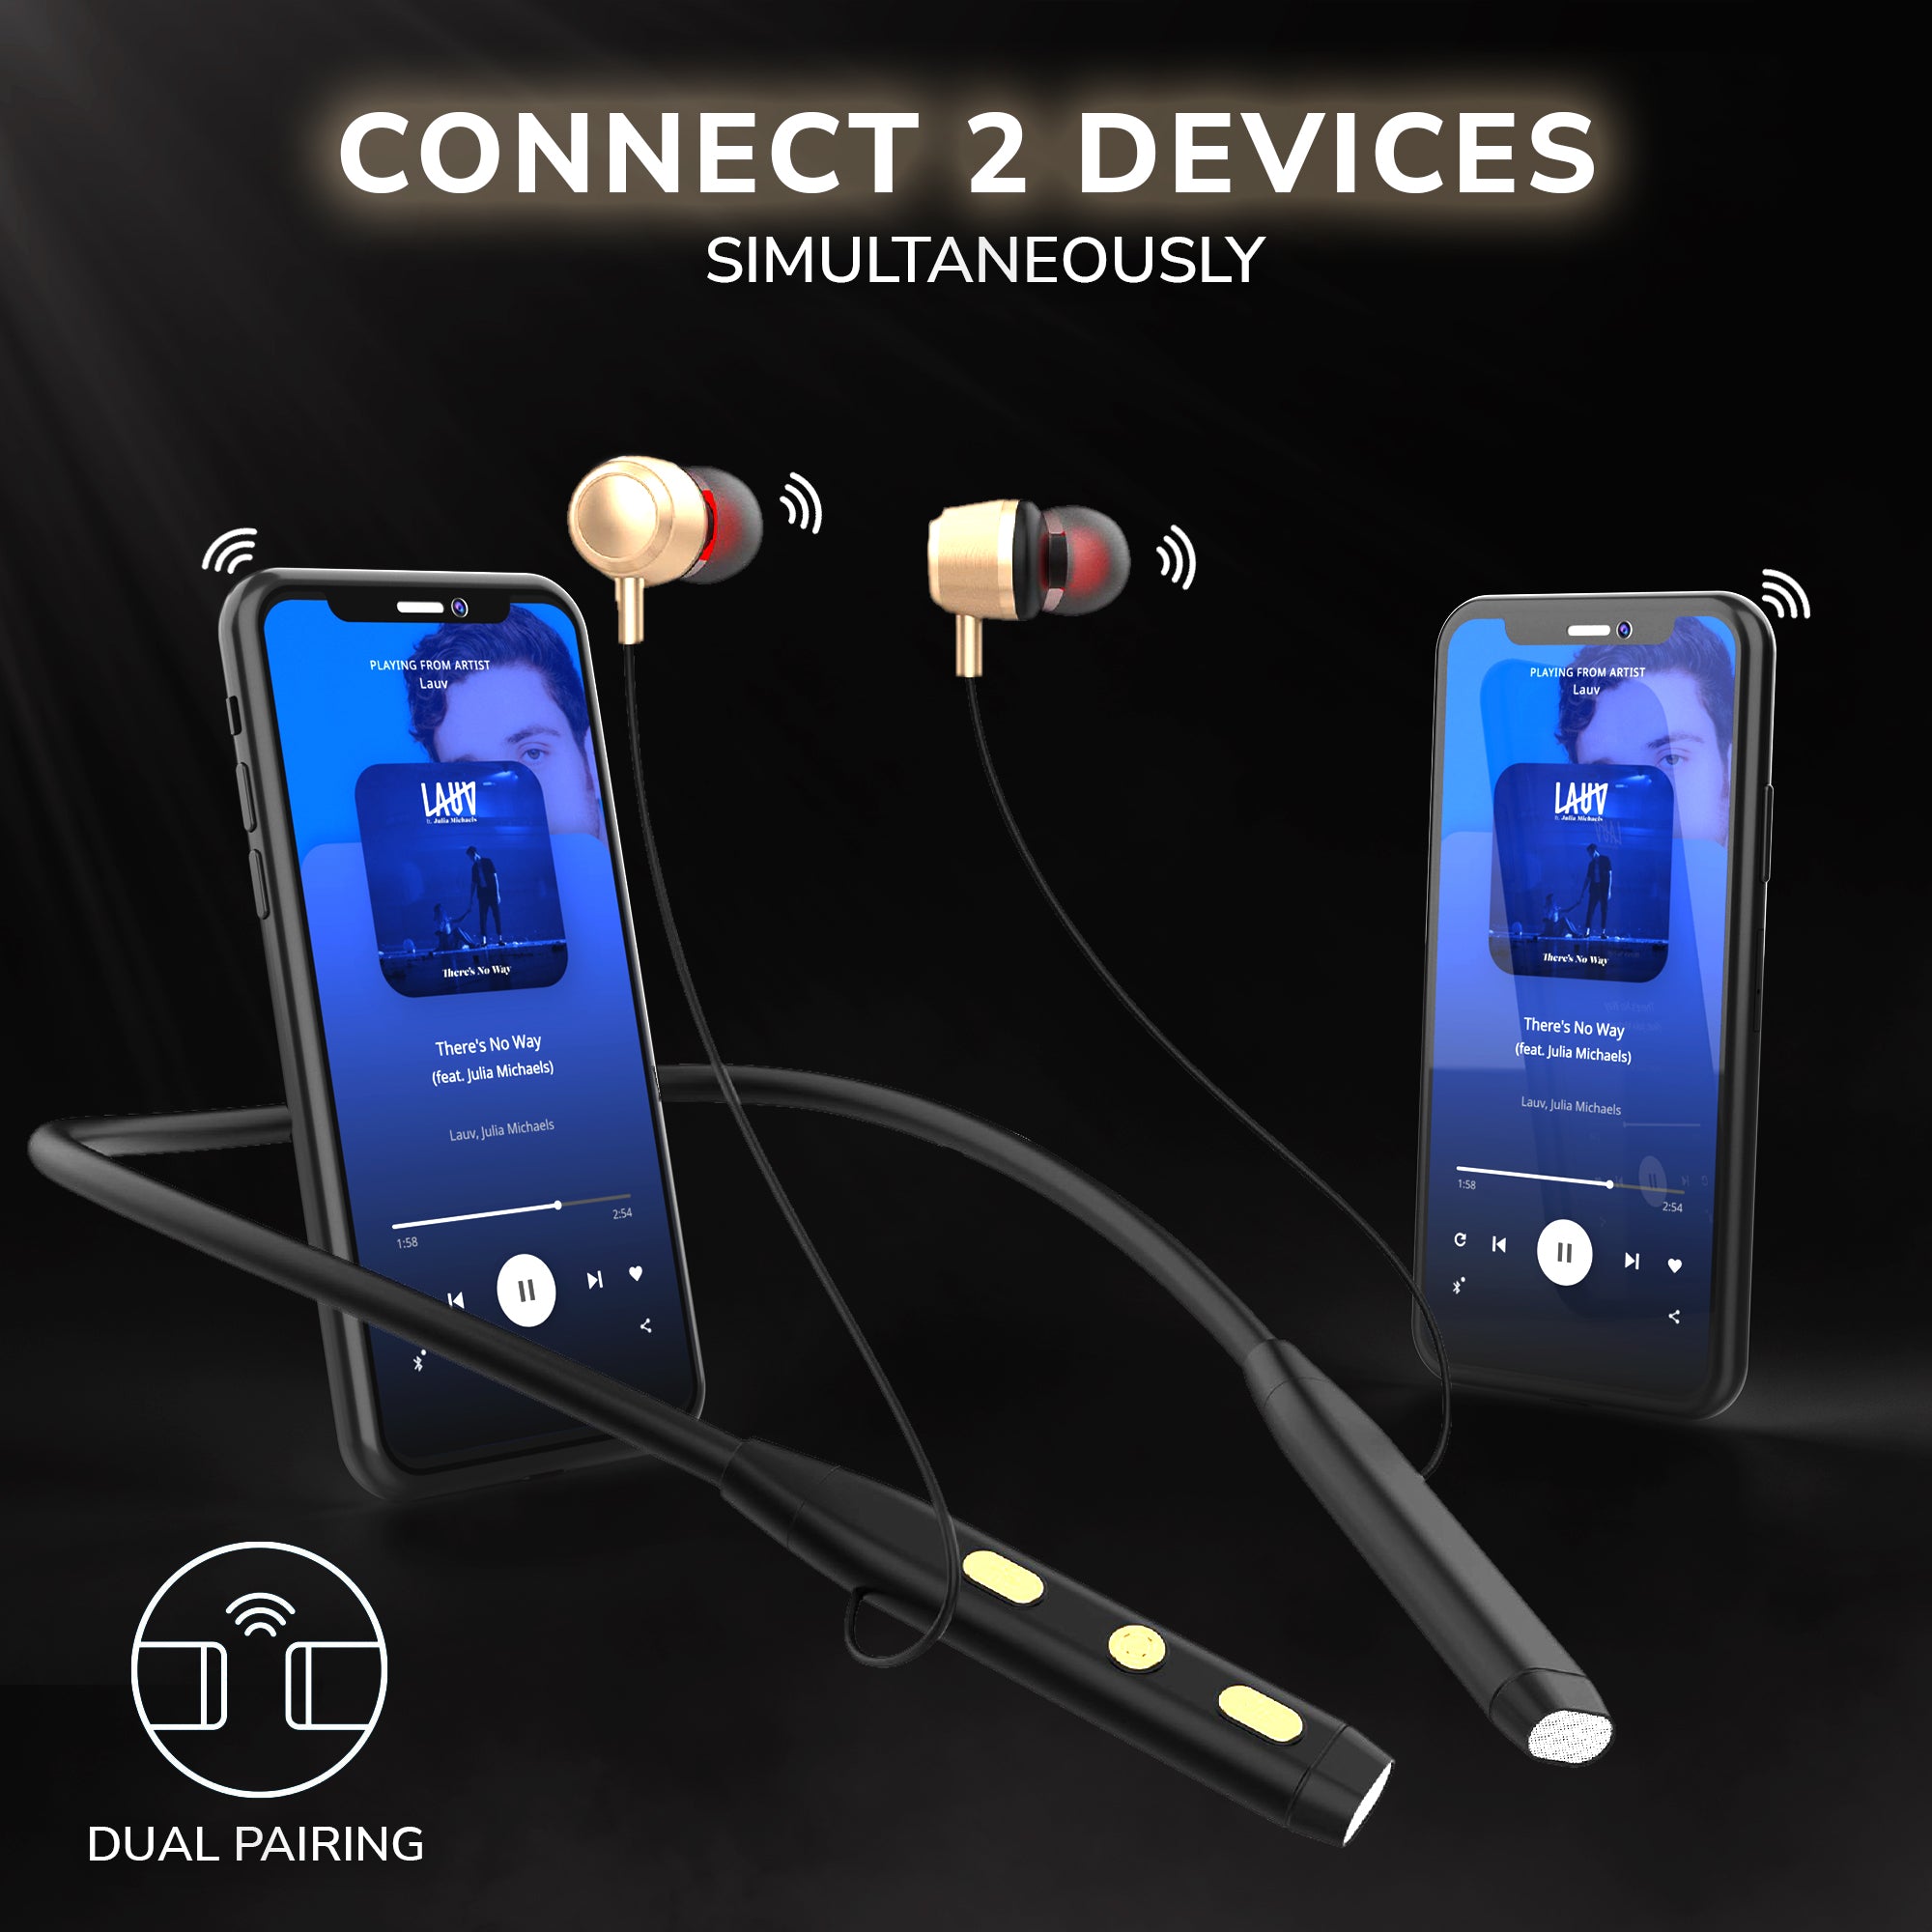 GIZMORE MN226 Jazz Bluetooth Wireless 5.0 in Ear Neckband Earphone with mic, Up to 25 HRS Playtime, Dual Pairing, Hi-Fi Stereo Sound, Multiple Controls and Lightweight